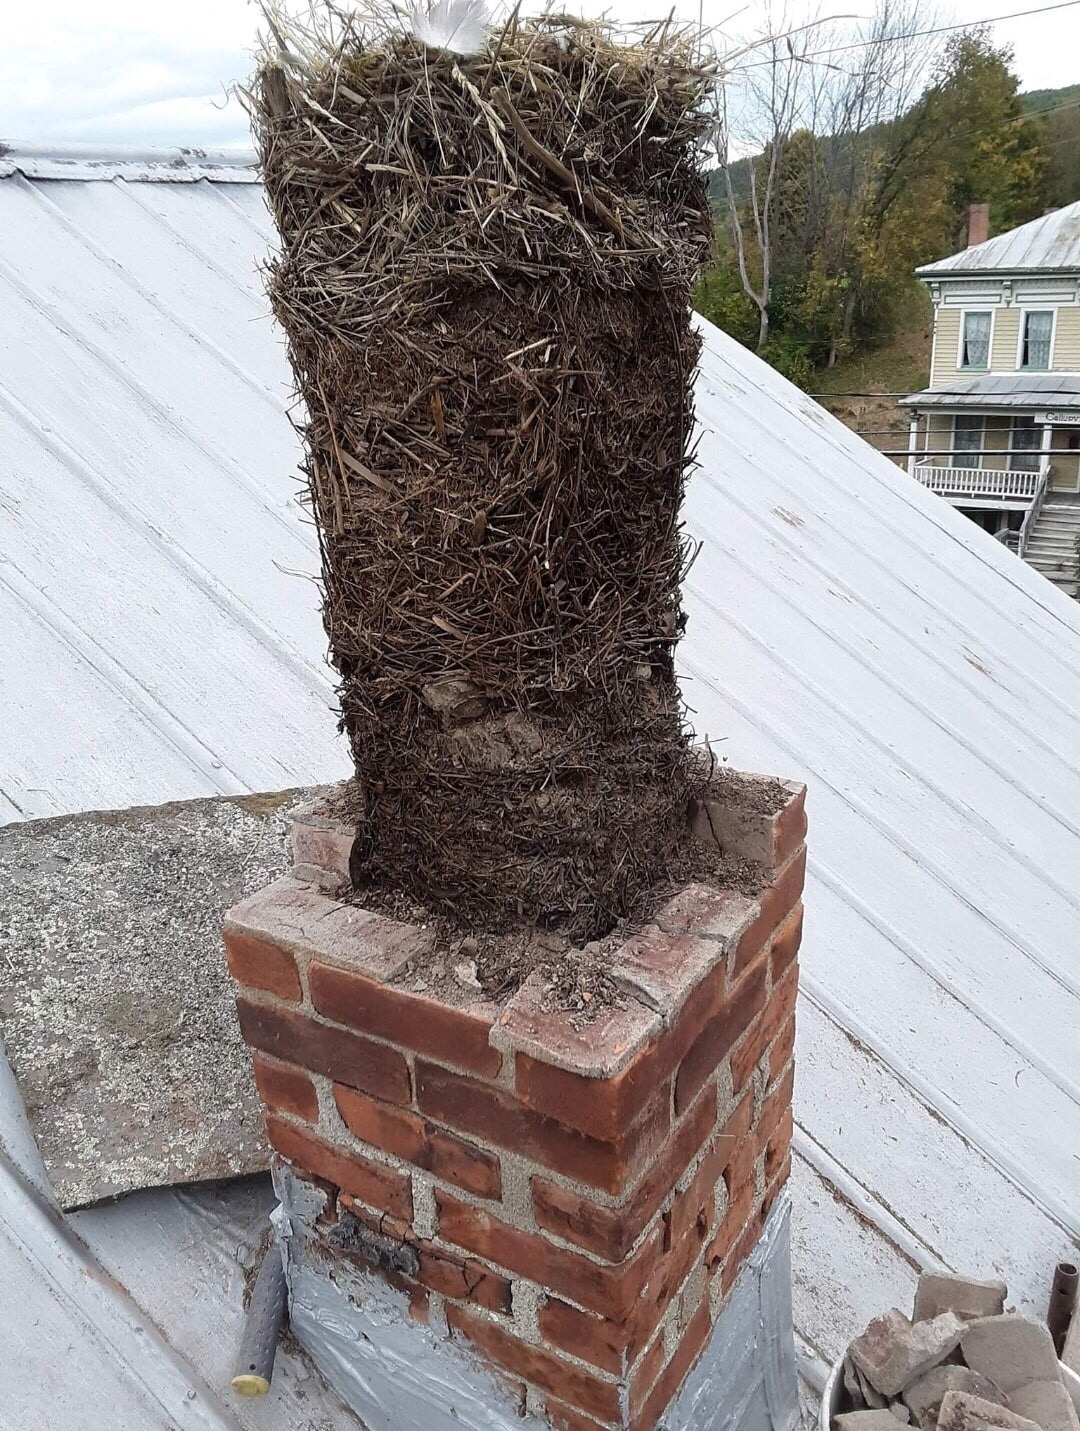 While demolishing an unused chimney, I discovered several generations of accumulated bird nests - Reddit, Birds, Nest, Pipe, Bake